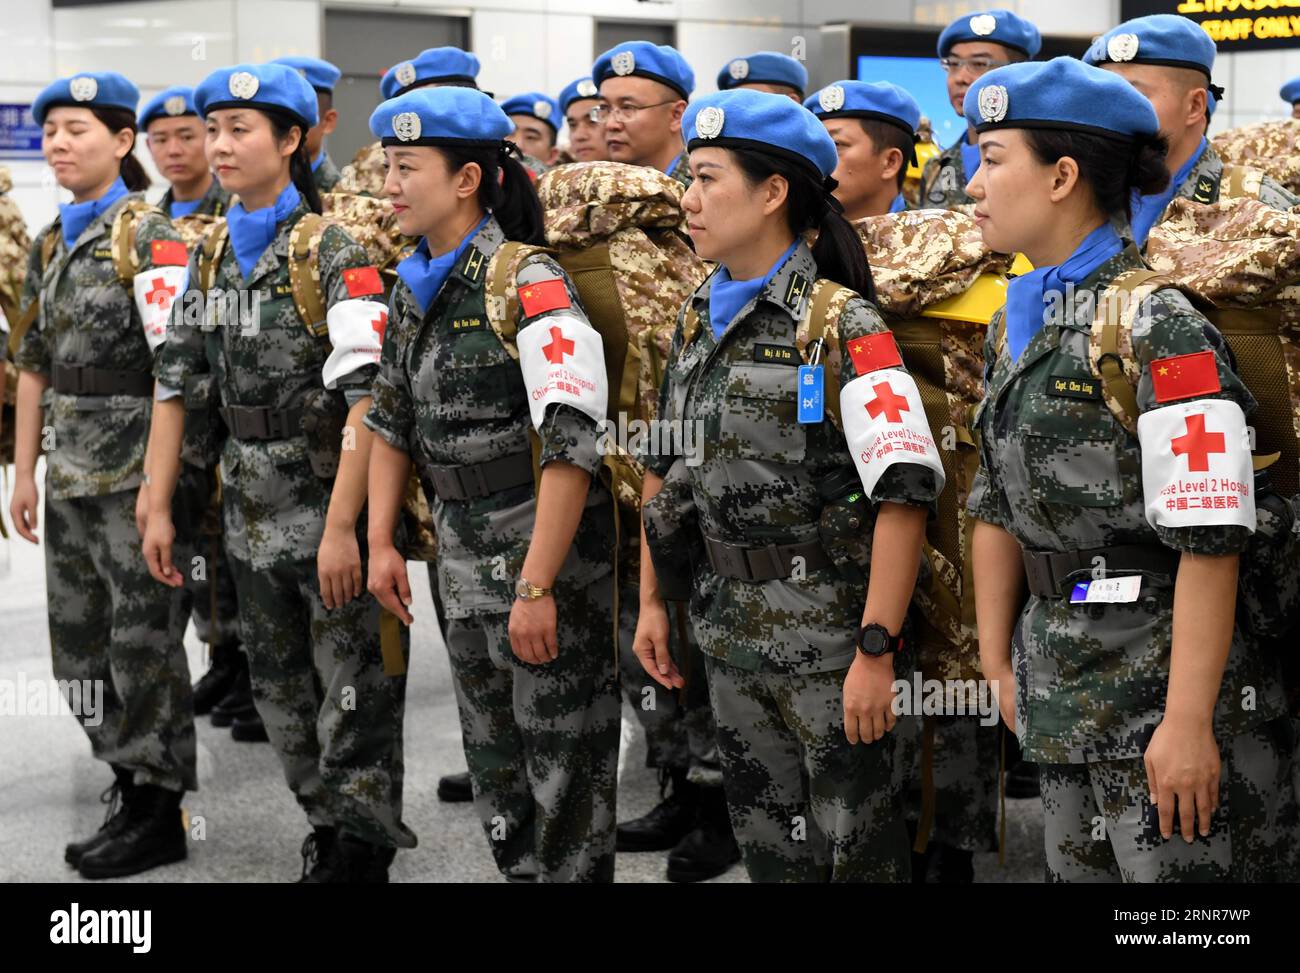 (170922) -- ZHENGZHOU, Sept. 22, 2017 -- Chinese female peacekeepers attend a ceremony before leaving for South Sudan from Zhengzhou, capital of central China s Henan Province, Sept. 21, 2017. The 105-member squad of Chinese peacekeepers left for Wau in South Sudan on a one-year peacekeeping mission. ) (ry) CHINA-ZHENGZHOU-SOUTH SUDAN-PEACEKEEPERS (CN) ZhuxXiang PUBLICATIONxNOTxINxCHN Stock Photo